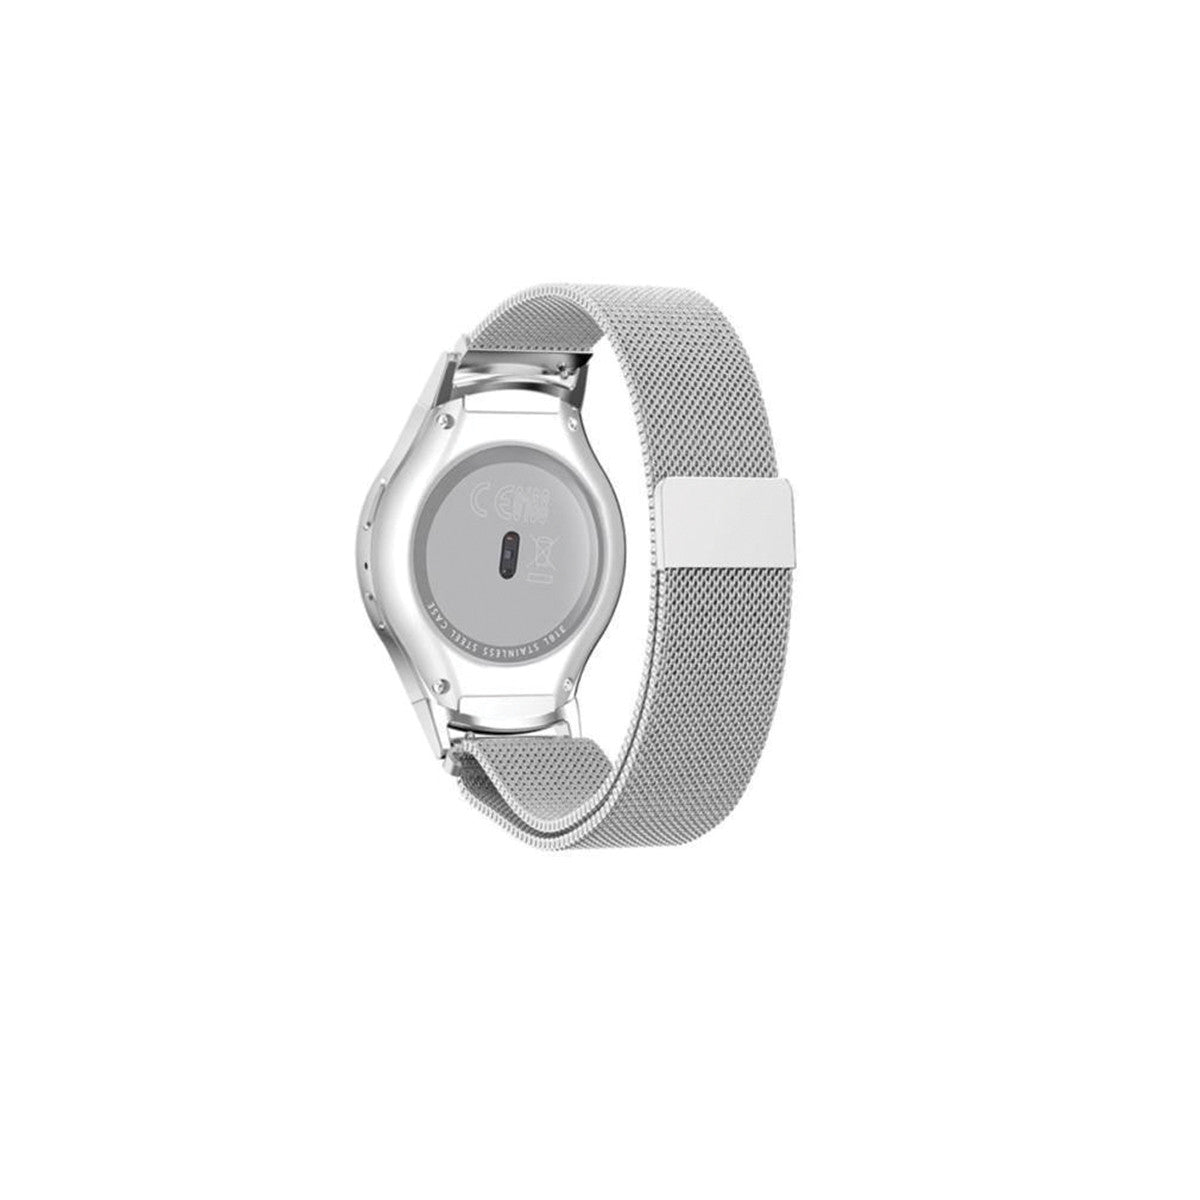 Milanese Samsung Gear S2 Band Replacement Magnetic Lock SM-R720 Silver Steel  